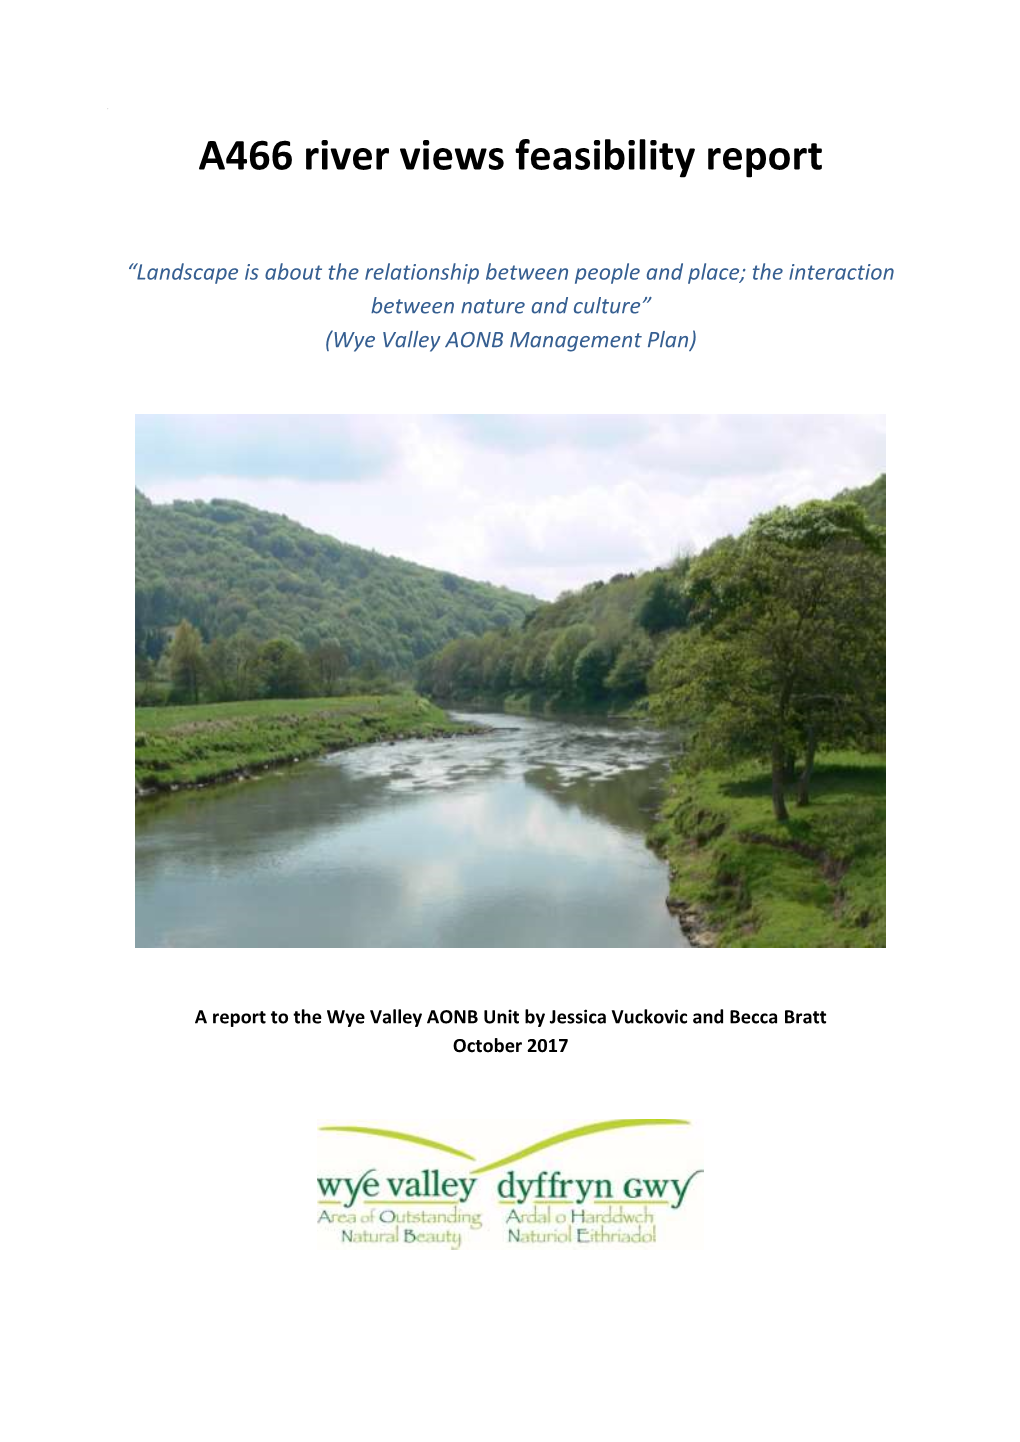 A466 River Views Feasibility Report